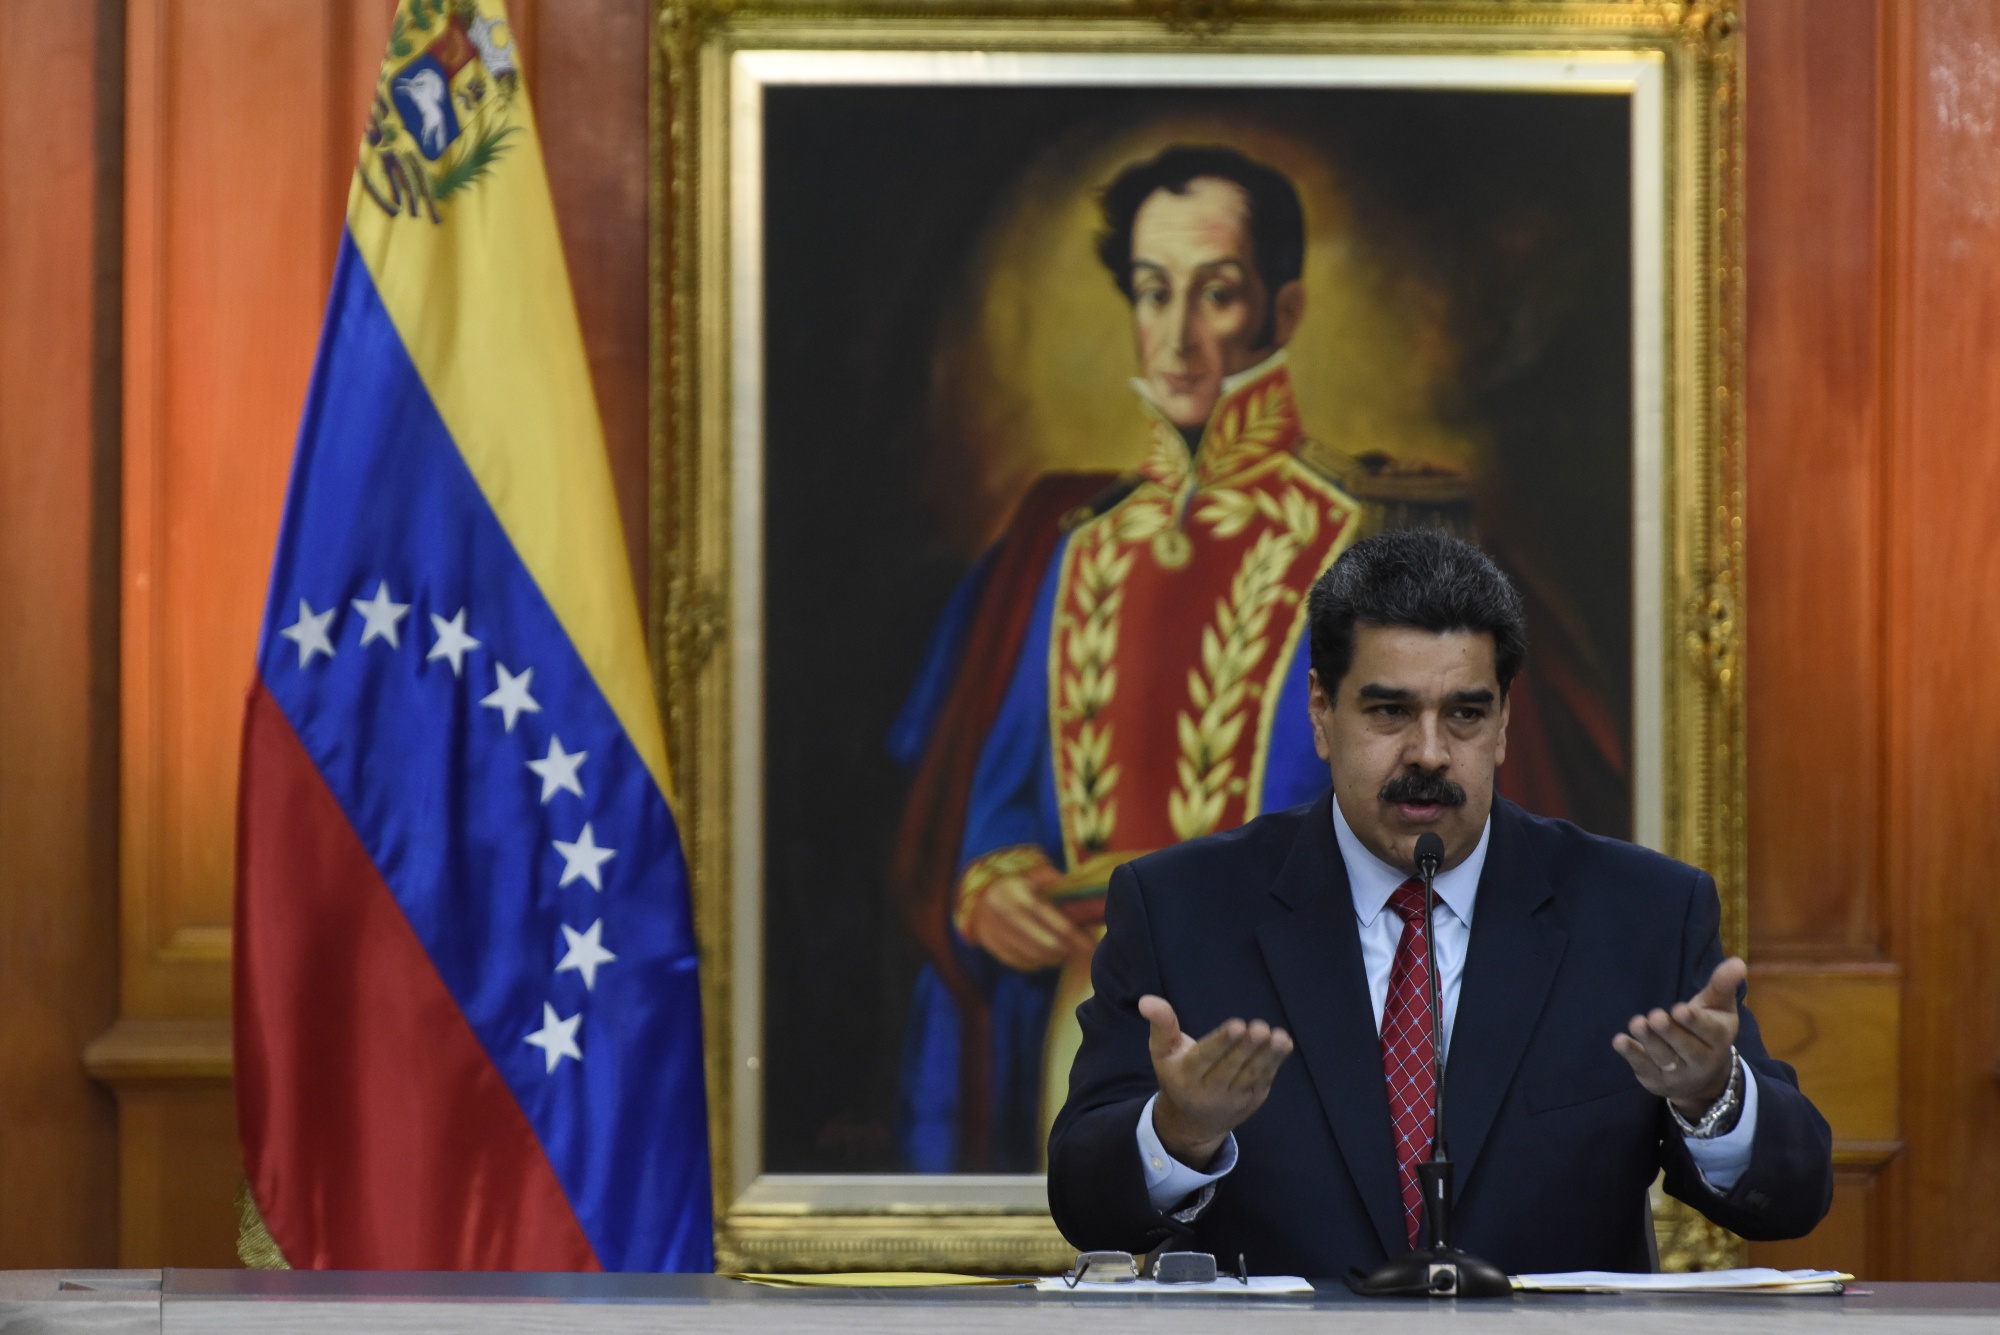 Nicolas Maduro speaks during a televised press conference in Caracas on Jan. 25.